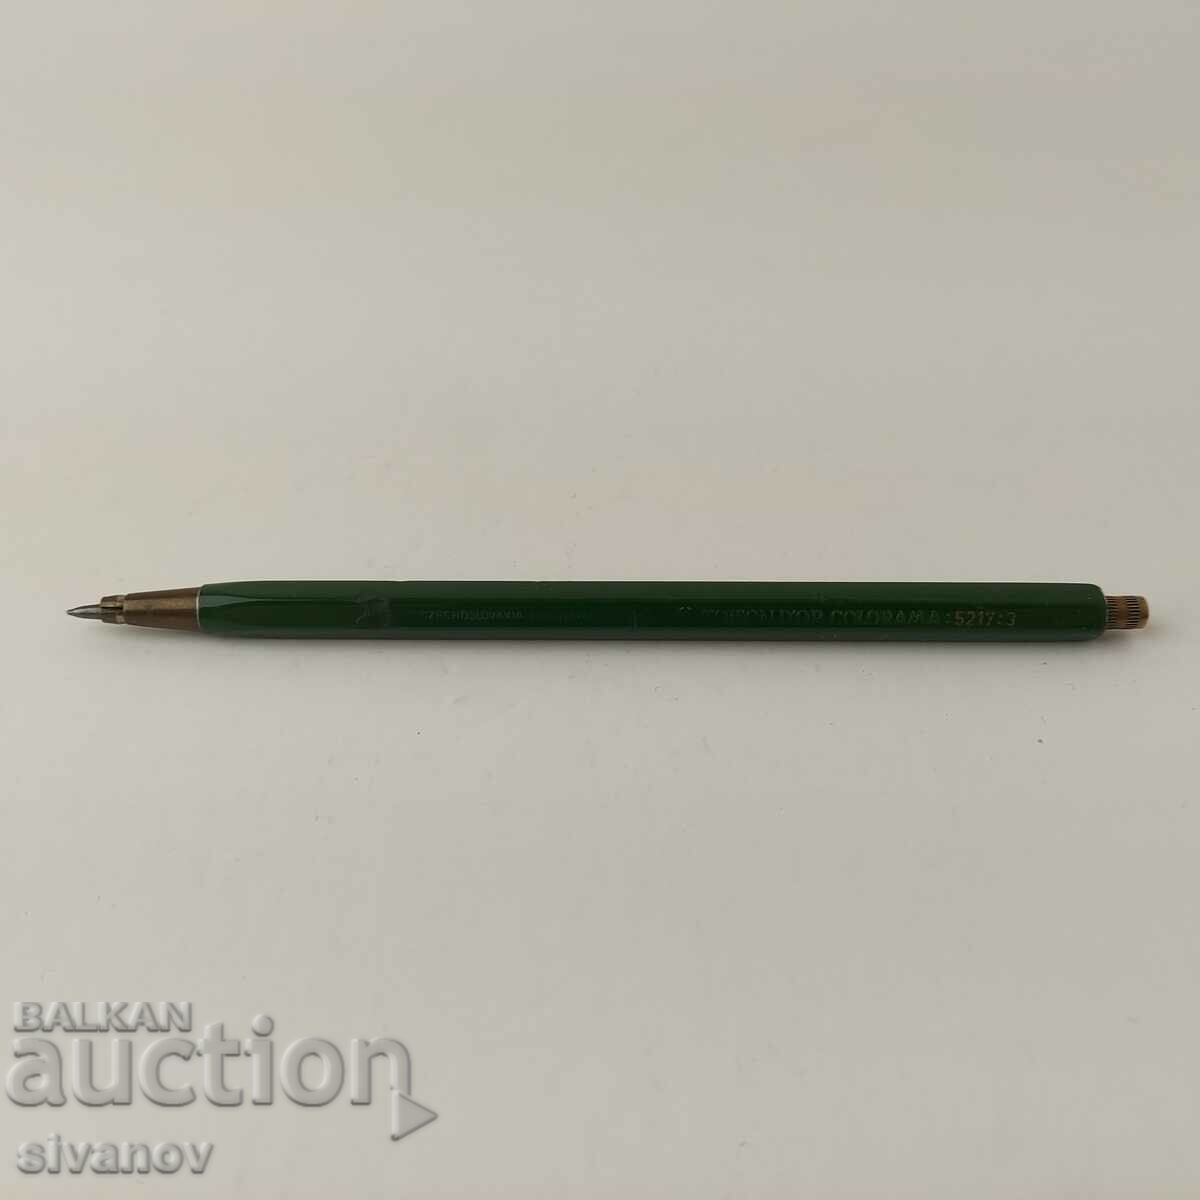 Old mechanical pencil TOISON D'OR COLORAMA 5217:3 #5492